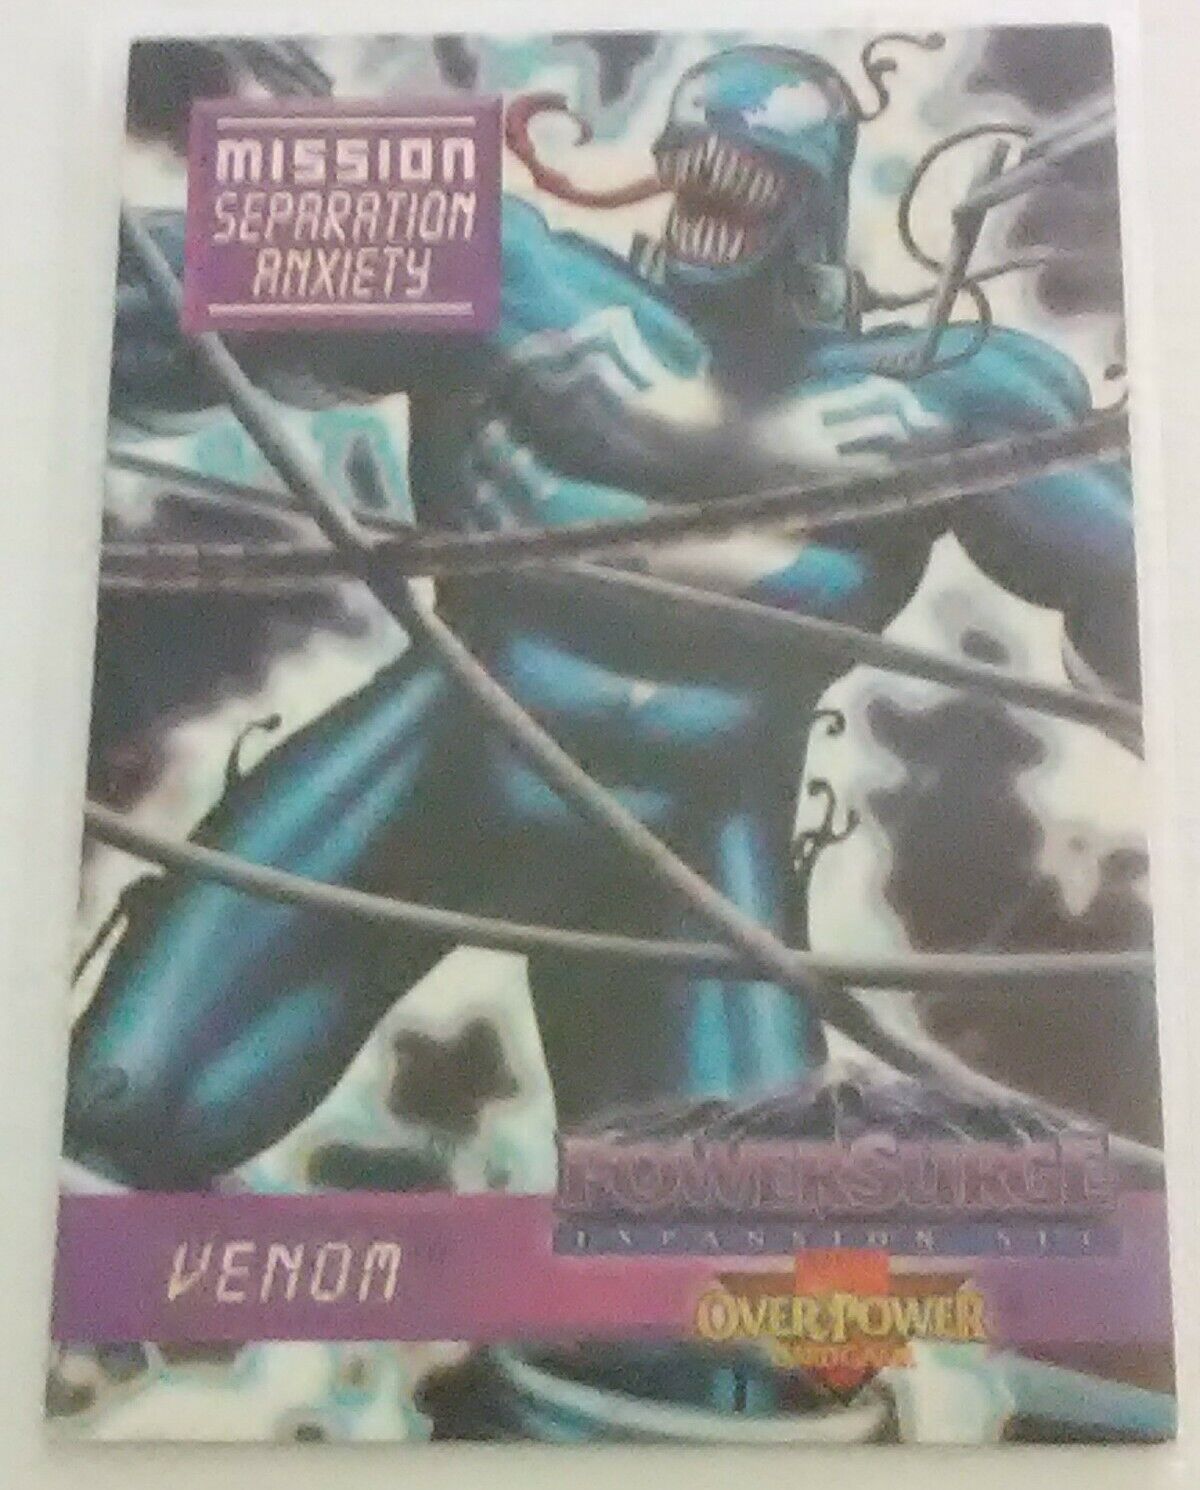 1995 VENOM: SEPARATION ANXIETY, MARVEL OVERPOWER Trading Card Game Near Mint 9.6